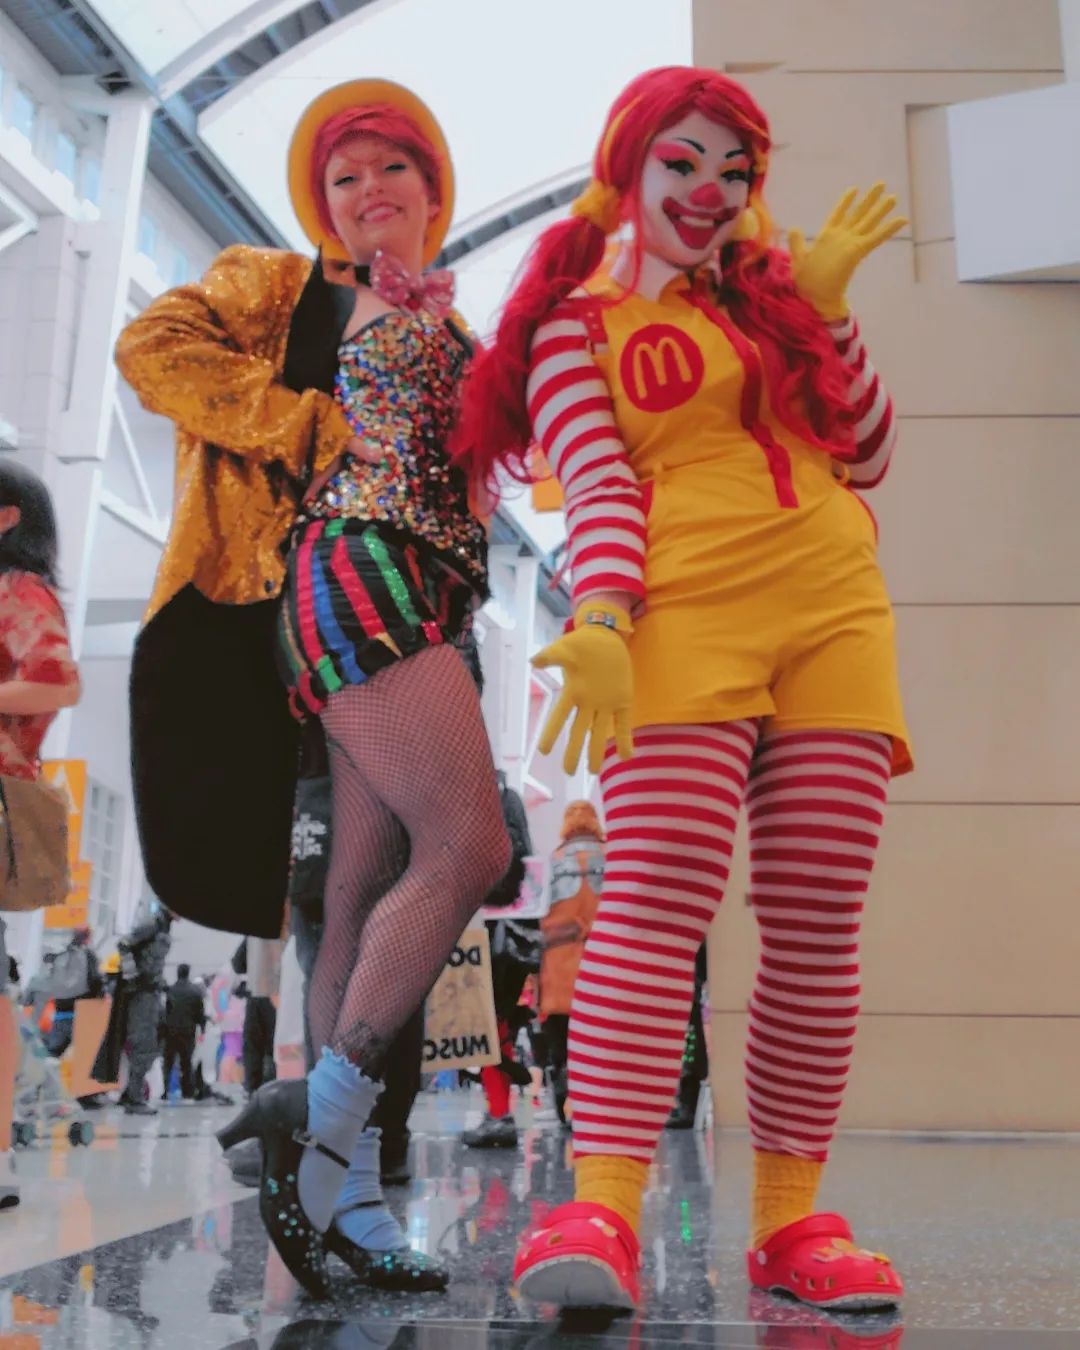 going miles for a smiles at @c2e2 ❤🤡💛
.
.
❤ custom Ronald McDonald jumper made by me
❤ shoes by @crocs 
.
.
.
.
.
.
.
.
.
.
.
#ronaldmcdonald #mcdonaldland #ronaldmcdonaldcosplay #clowngirl #cuteclown #clownmakeup #clown #mcdonalds #c2e2 #c2e22024 #chicagocomiccon #chicagocosplayer #girlswhocosplay #clowncore #clowncosplay #clowncostume